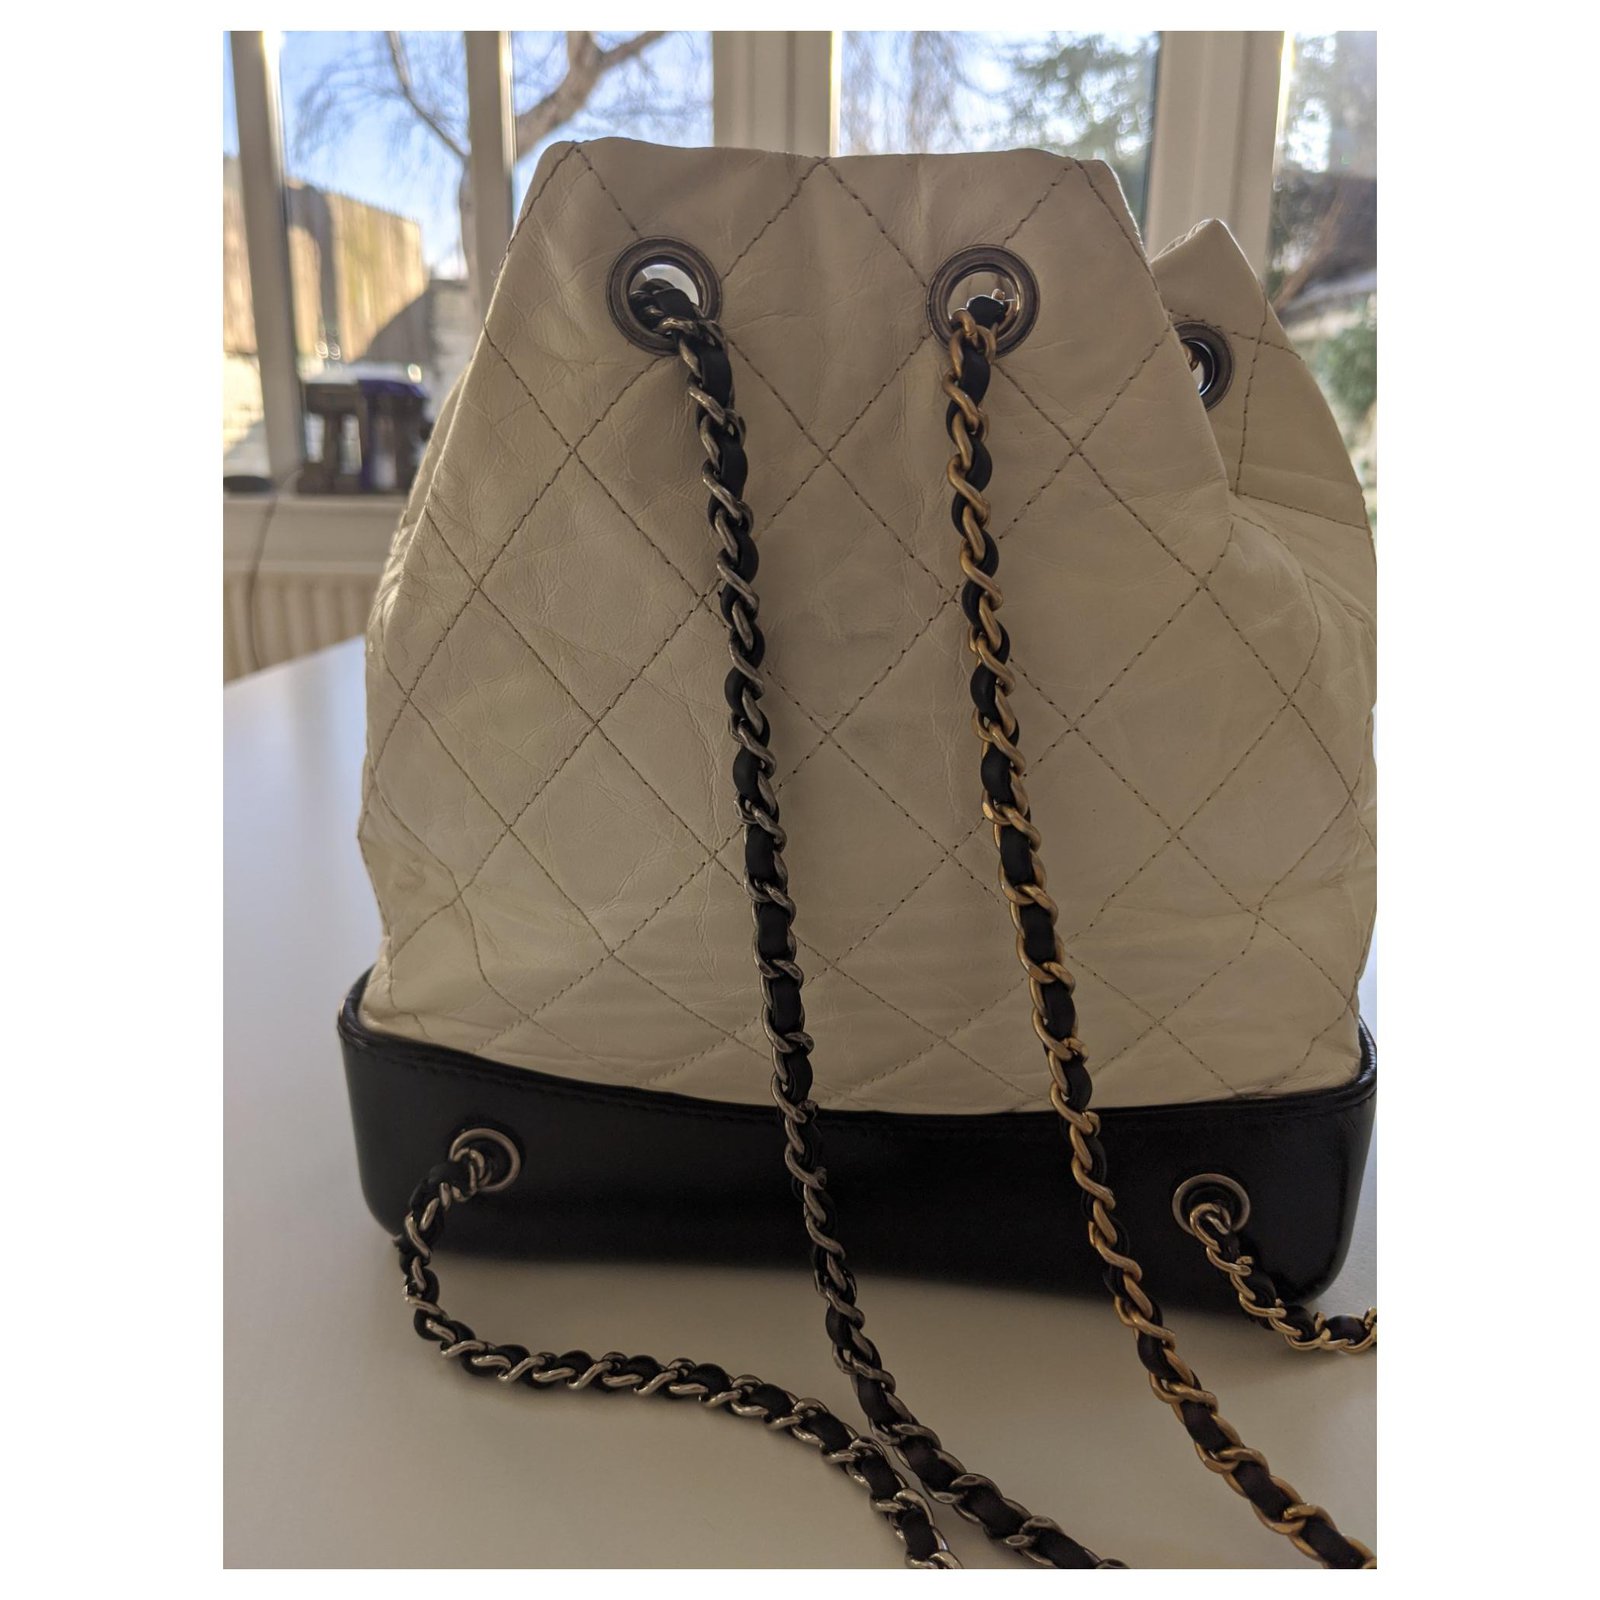 Chanel Gabrielle Backpack Small White Leather ref.169229 - Joli Closet